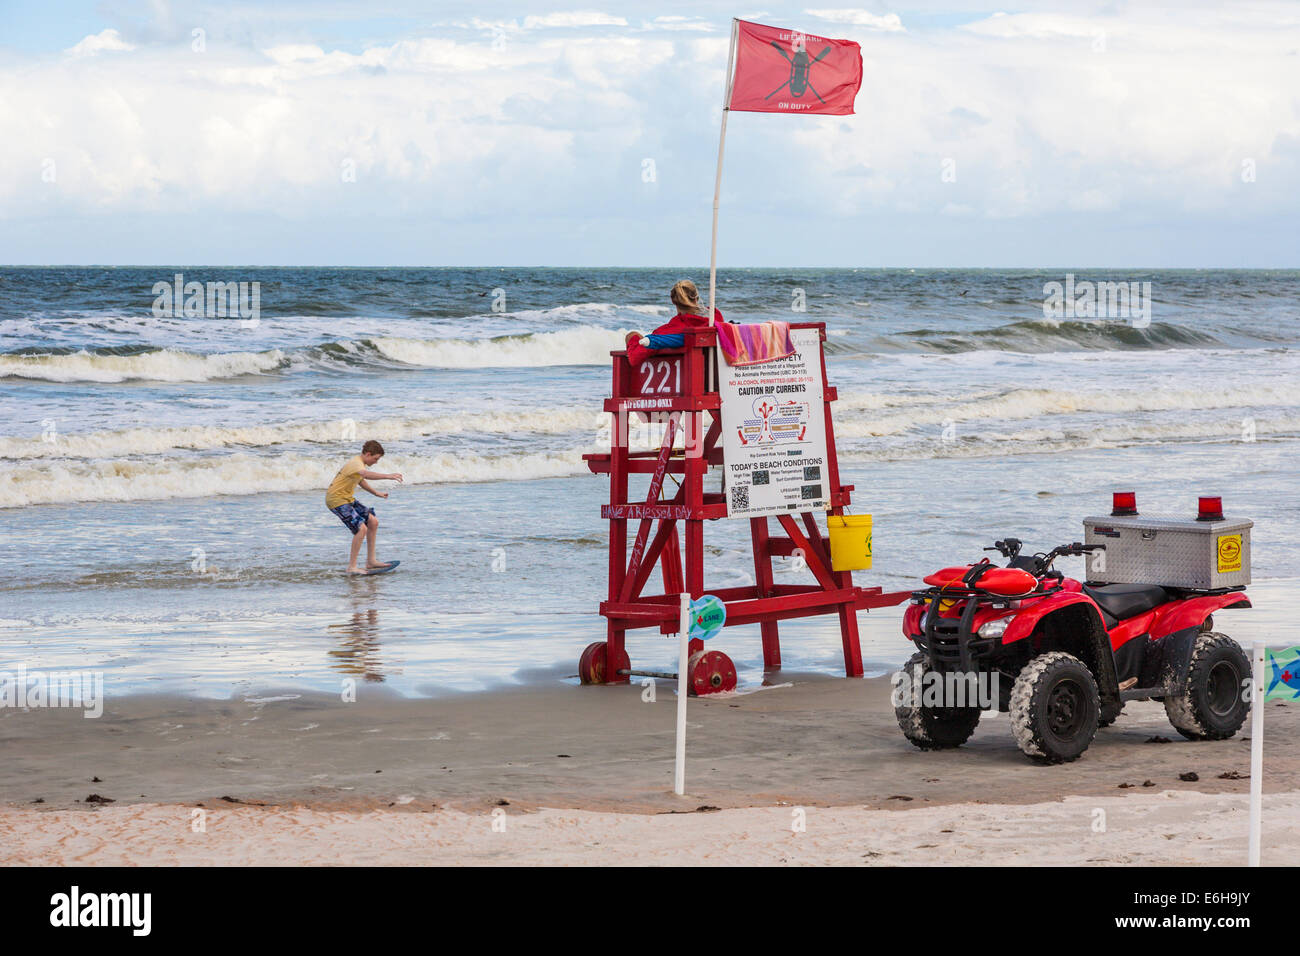 Lifeguard watches over young boy playing with skim board in the surf at Daytona Beach, Florida Stock Photo